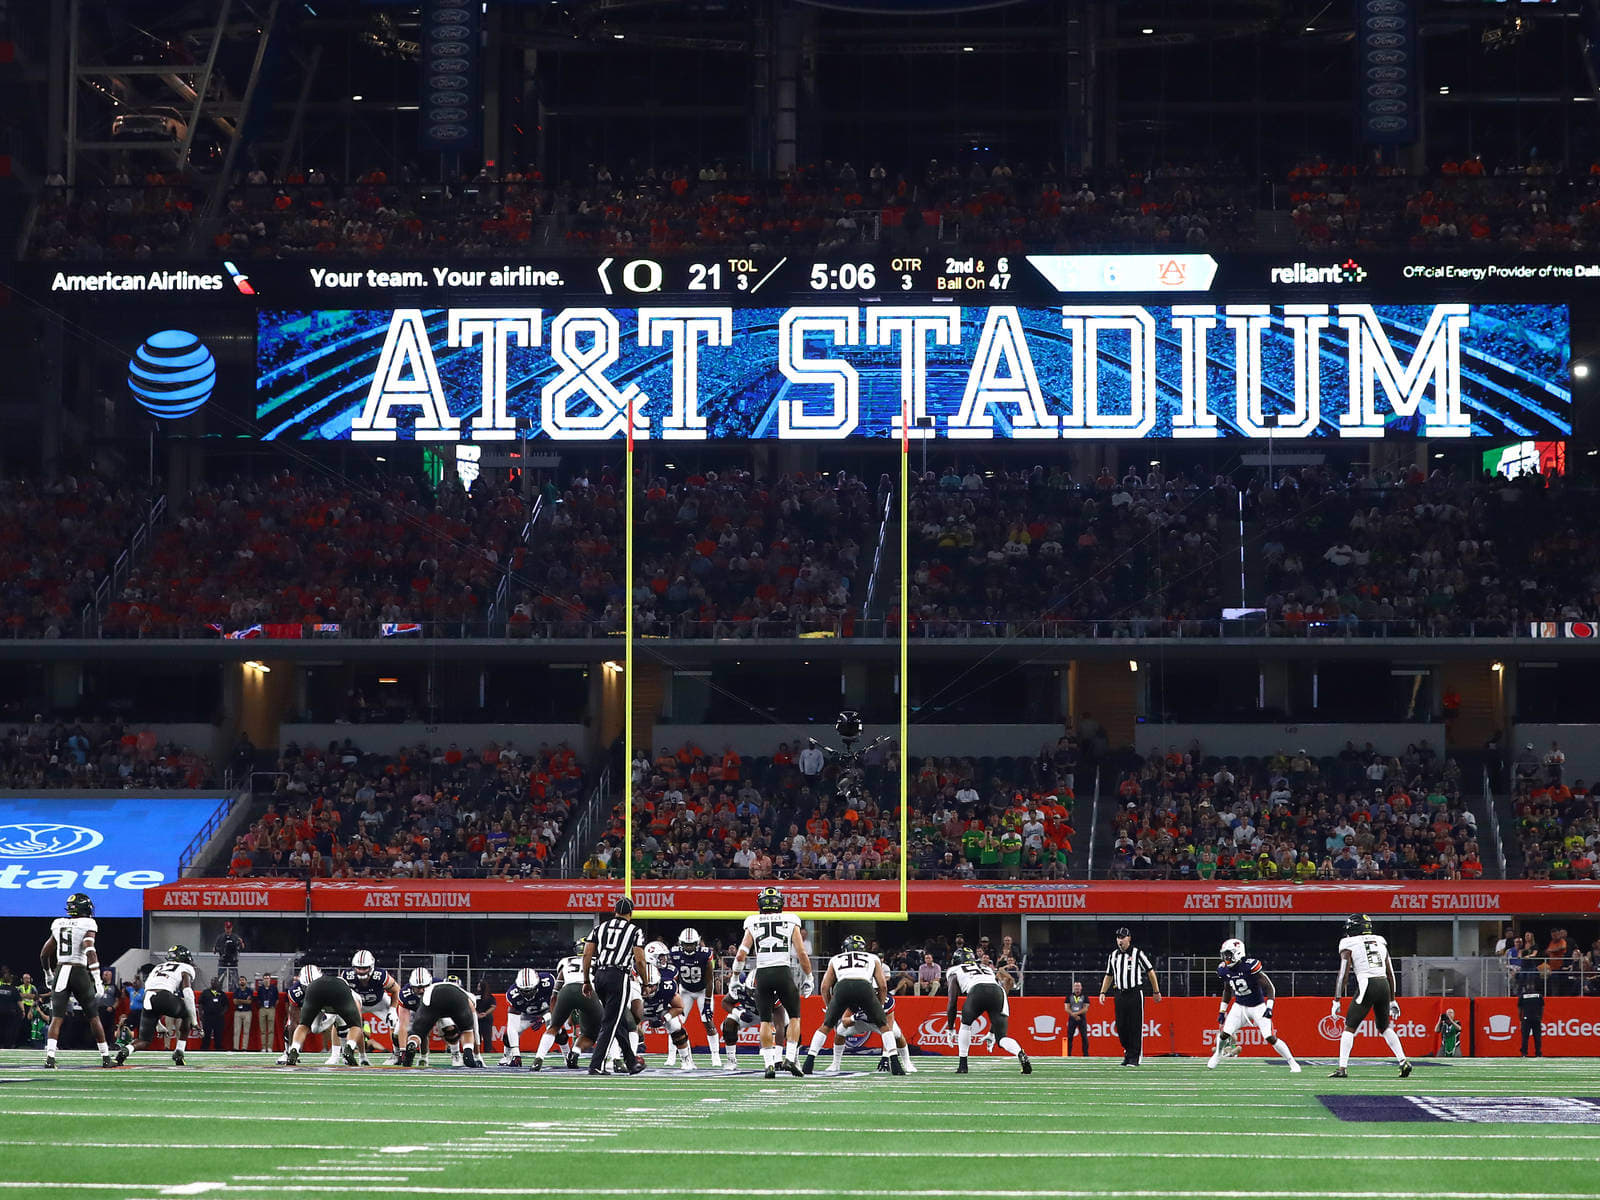 CFP semifinal moved from Rose Bowl to AT&T Stadium in Arlington